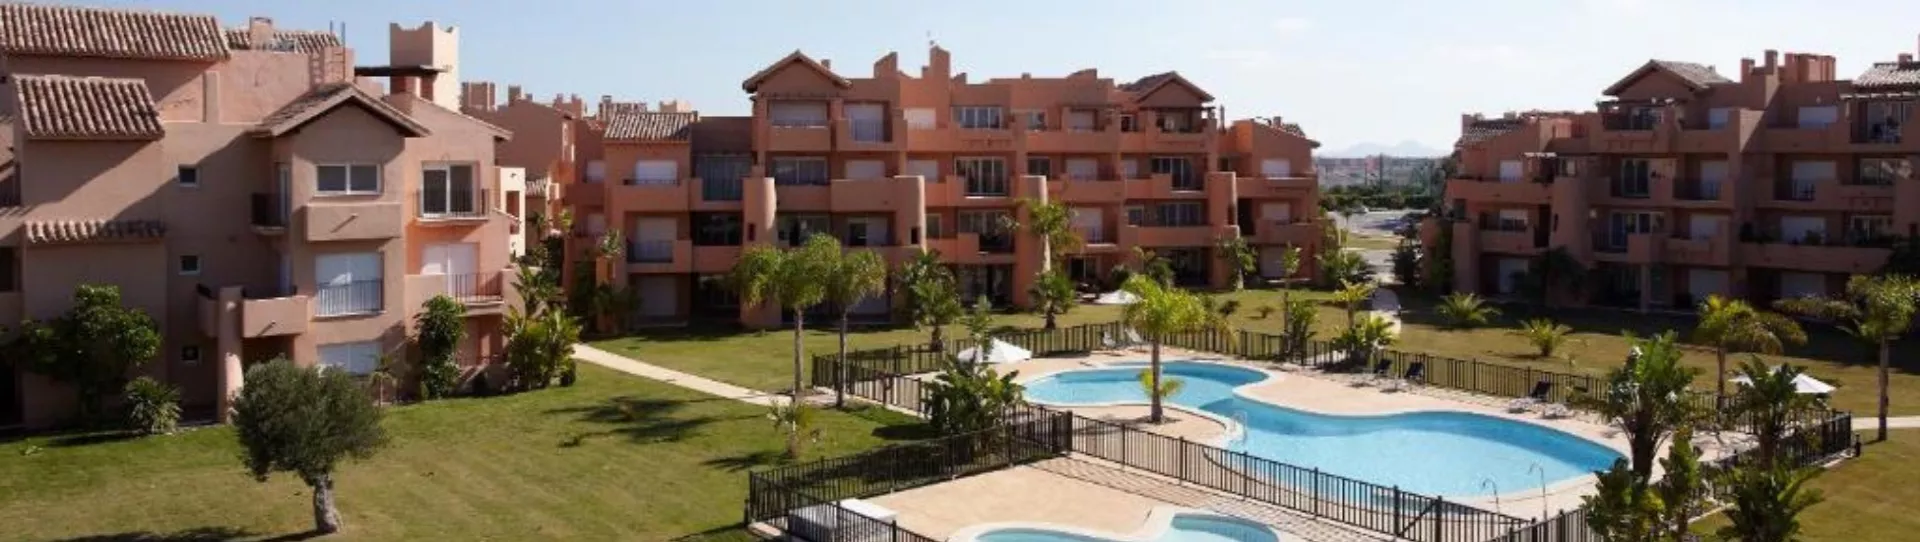 Spain golf holidays - 5 Nights BB & 4 Golf Rounds<br>Groups of 4 - Photo 2